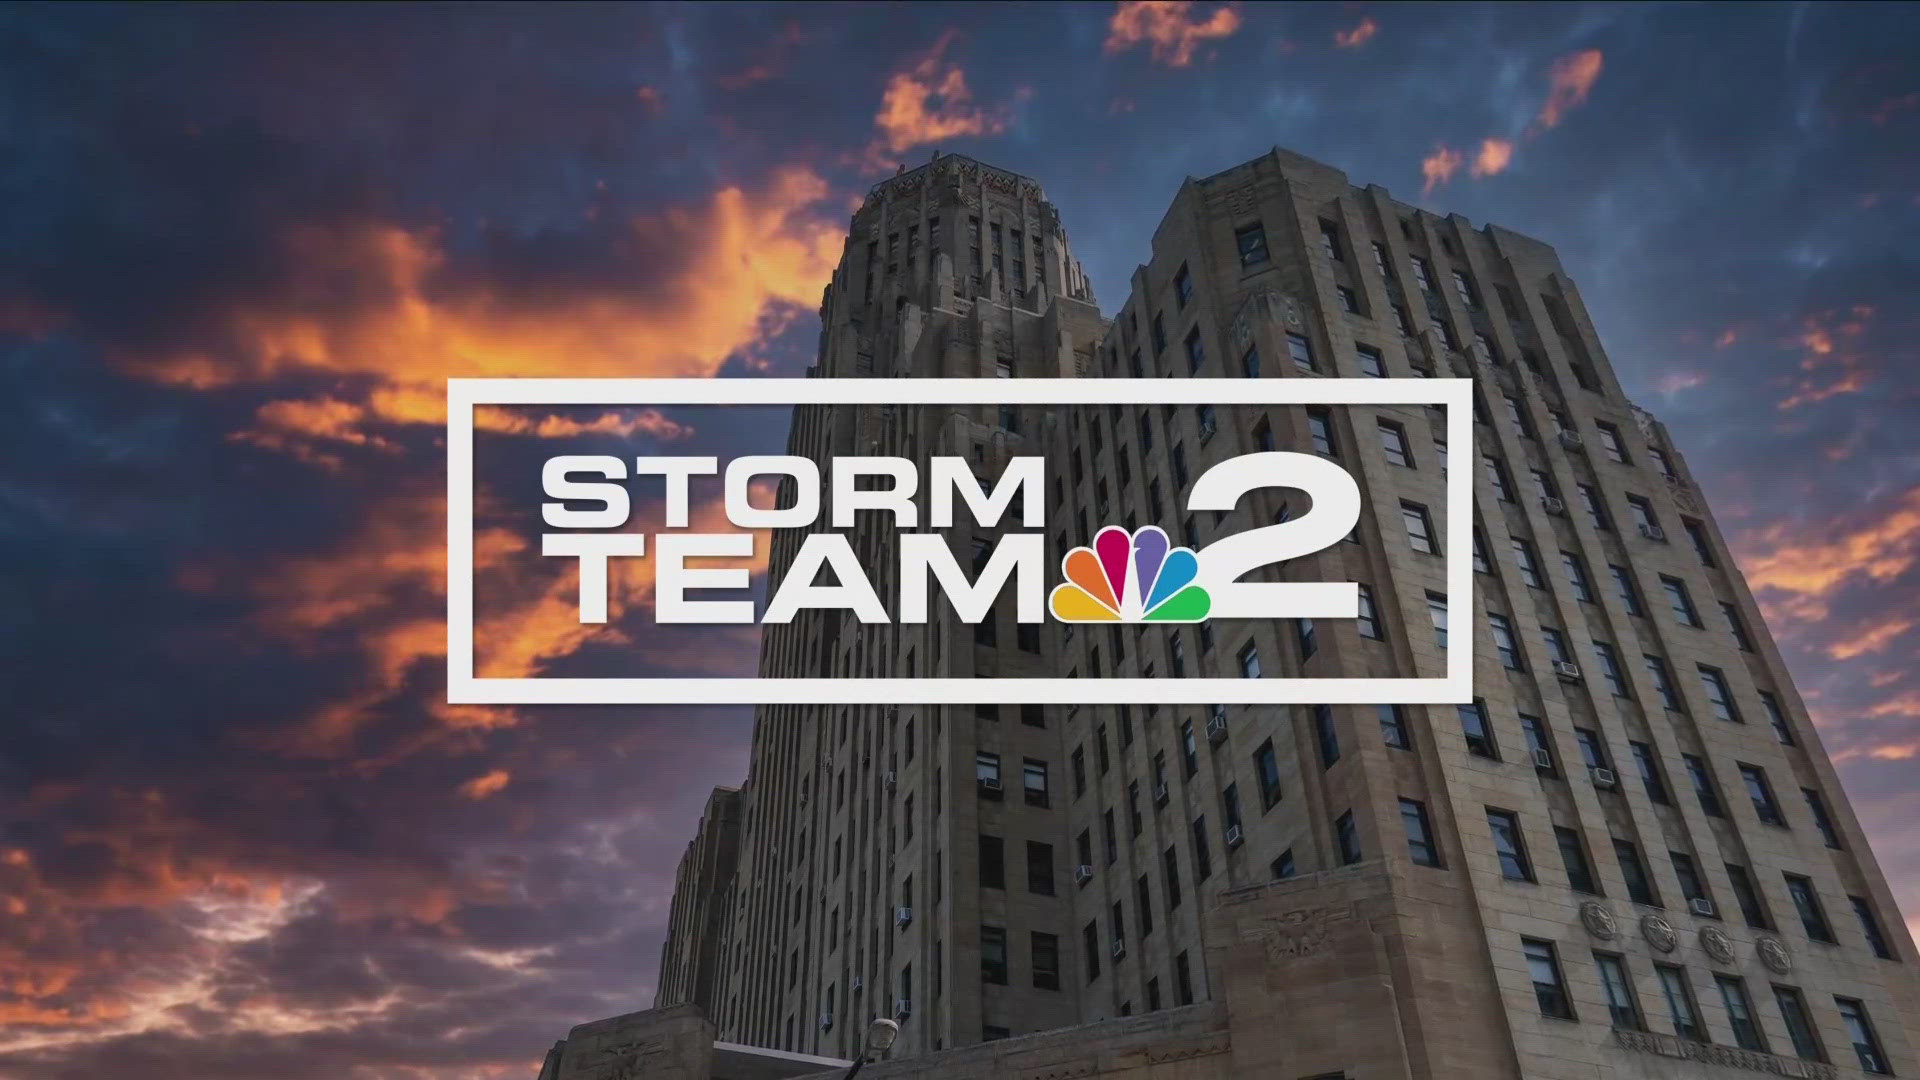 Storm Team 2 night forecast with Paul Hare for Sunday, May 19.